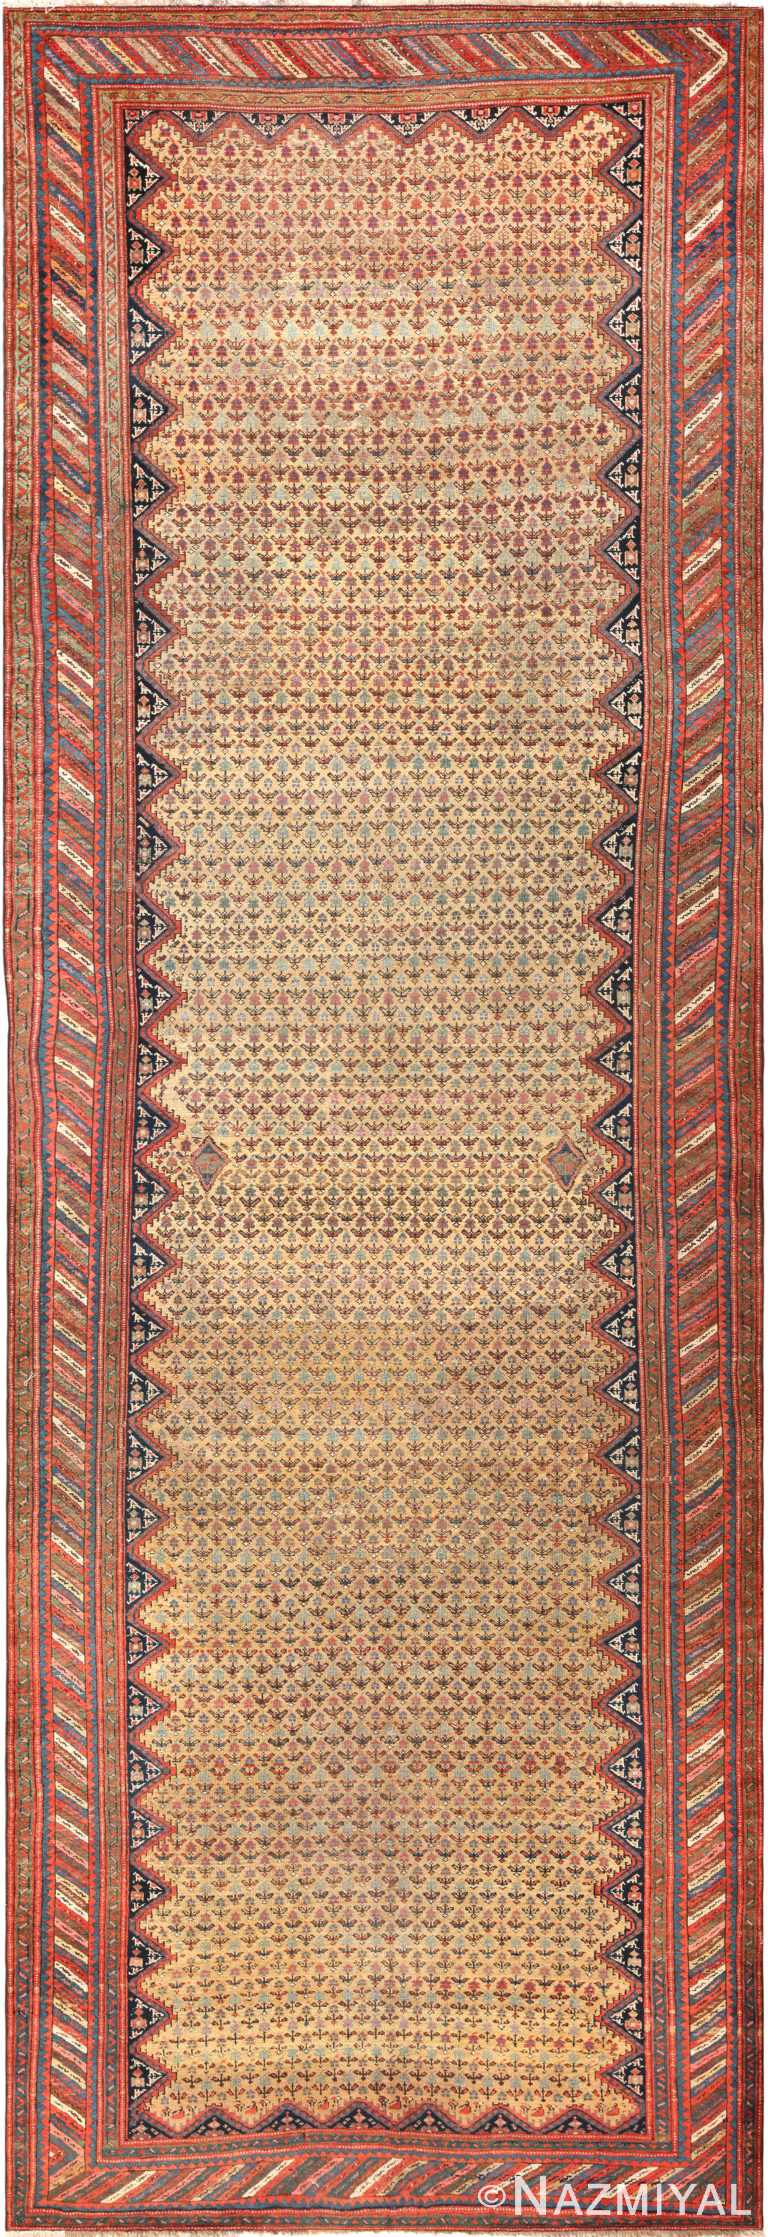 Antique Persian Kurdish Gallery Size Runner Rug 71998 by Nazmiyal Antique Rugs